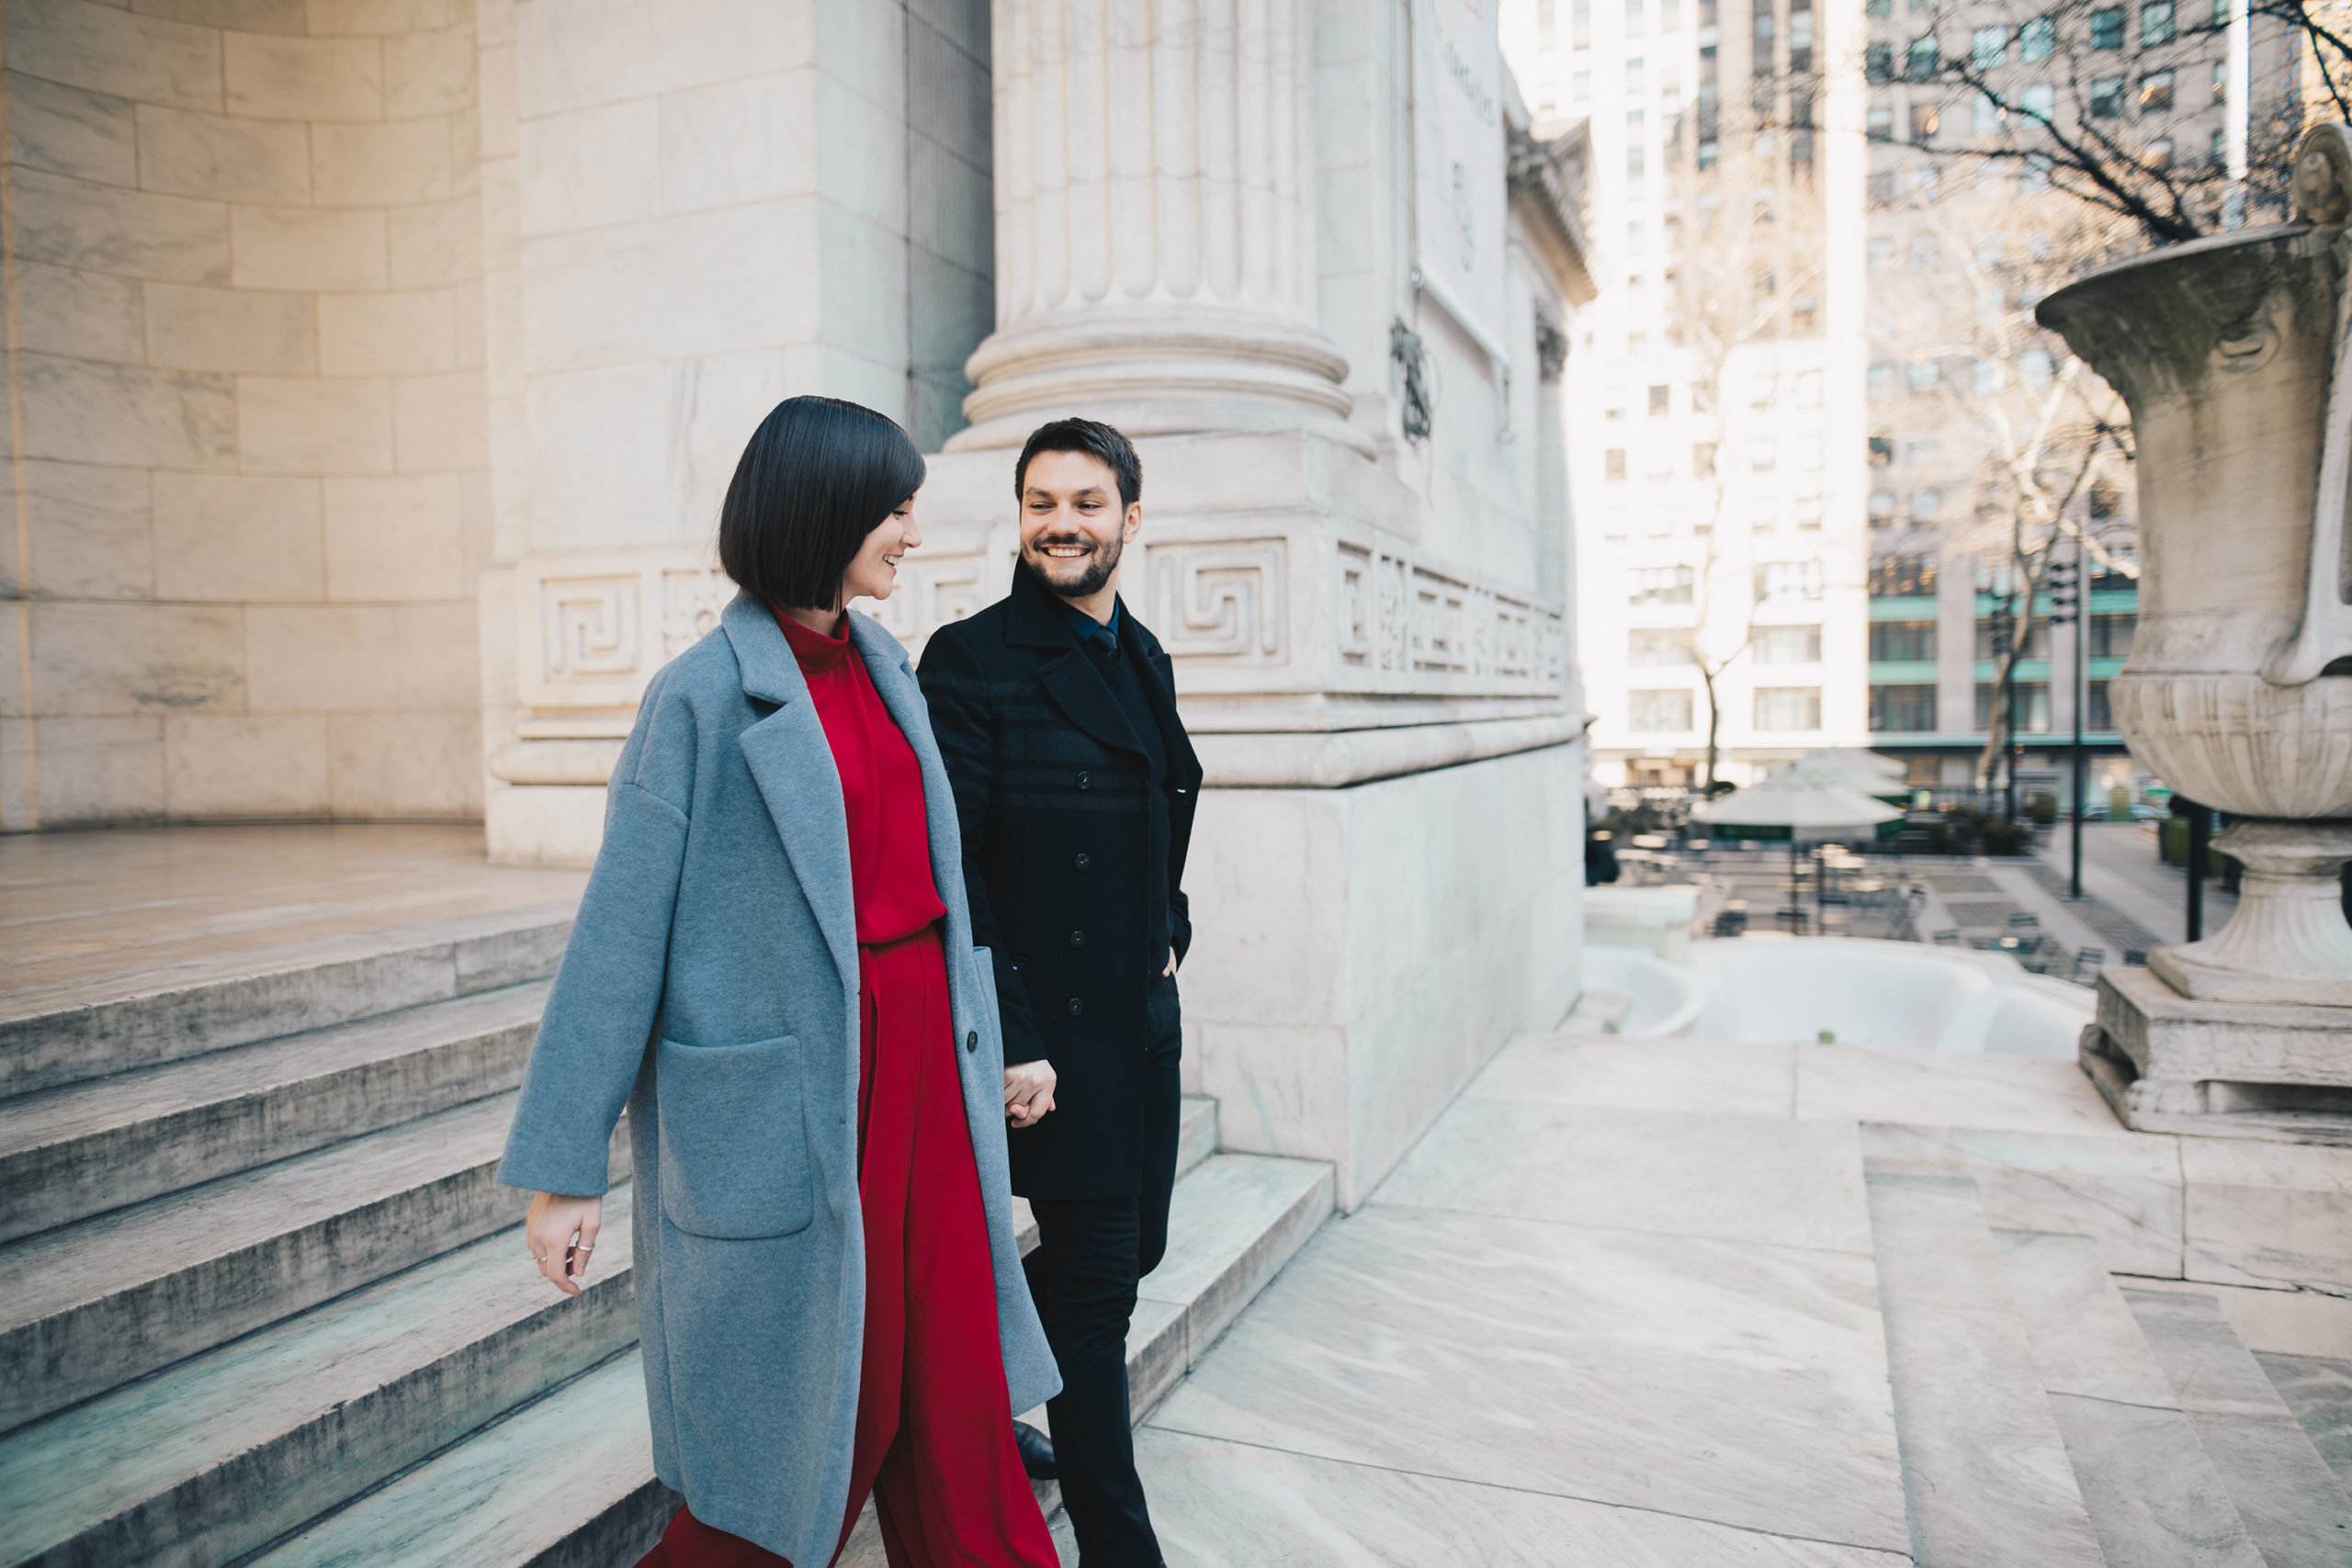 New York NYC Engagement photo locations and ideas